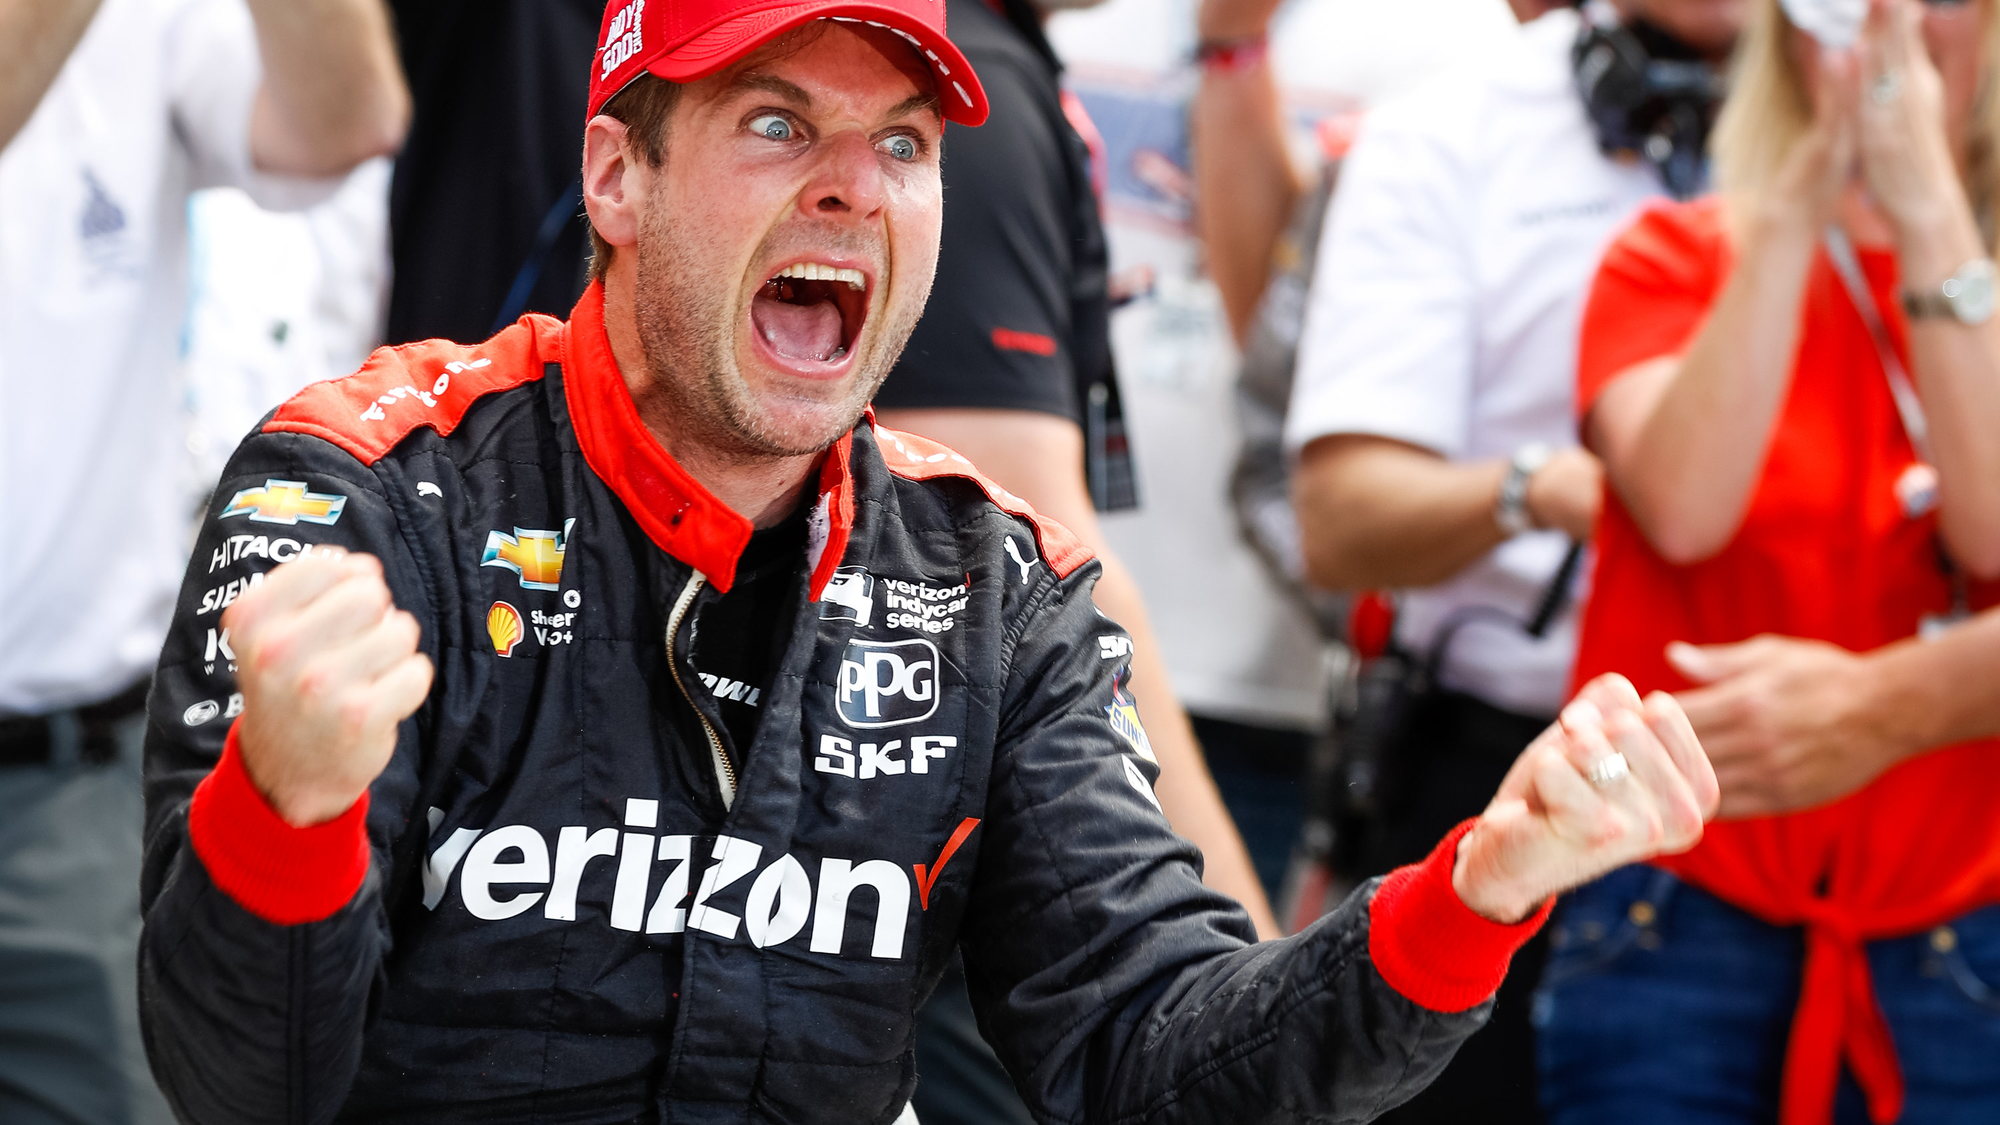 Will Power wins the 2018 Indianapolis 500